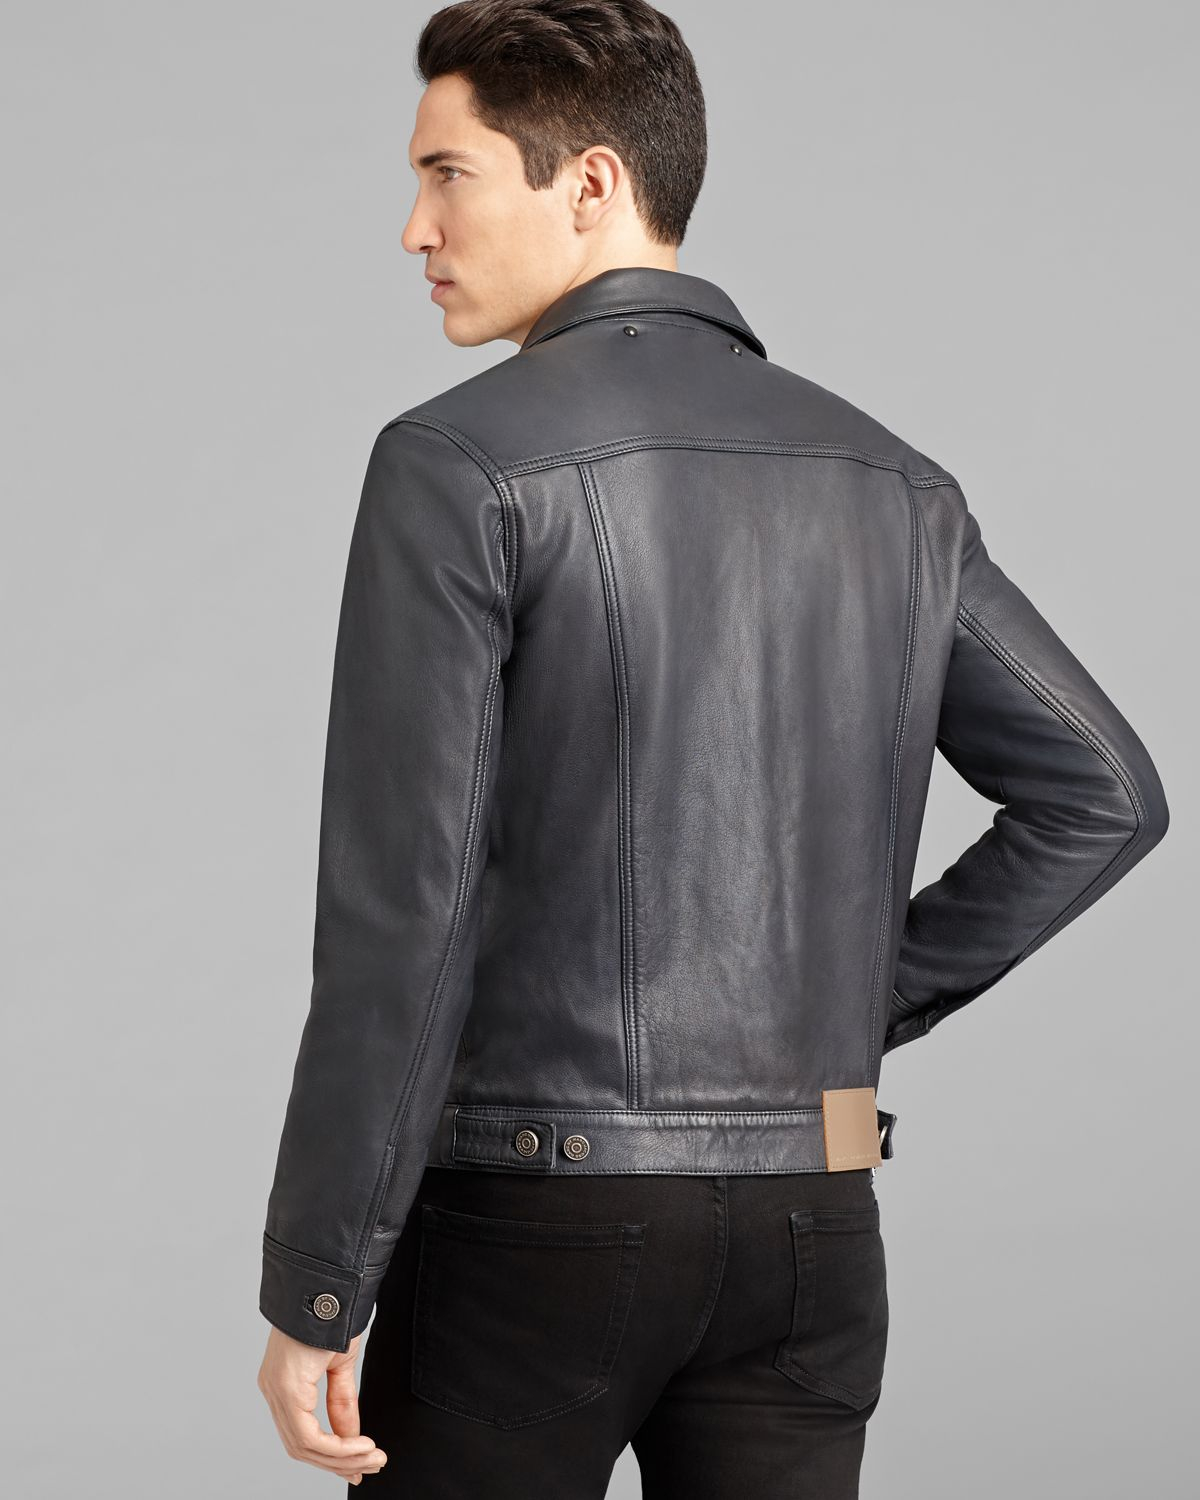 Lyst - Marc By Marc Jacobs Lambskin Leather Jacket in Black for Men